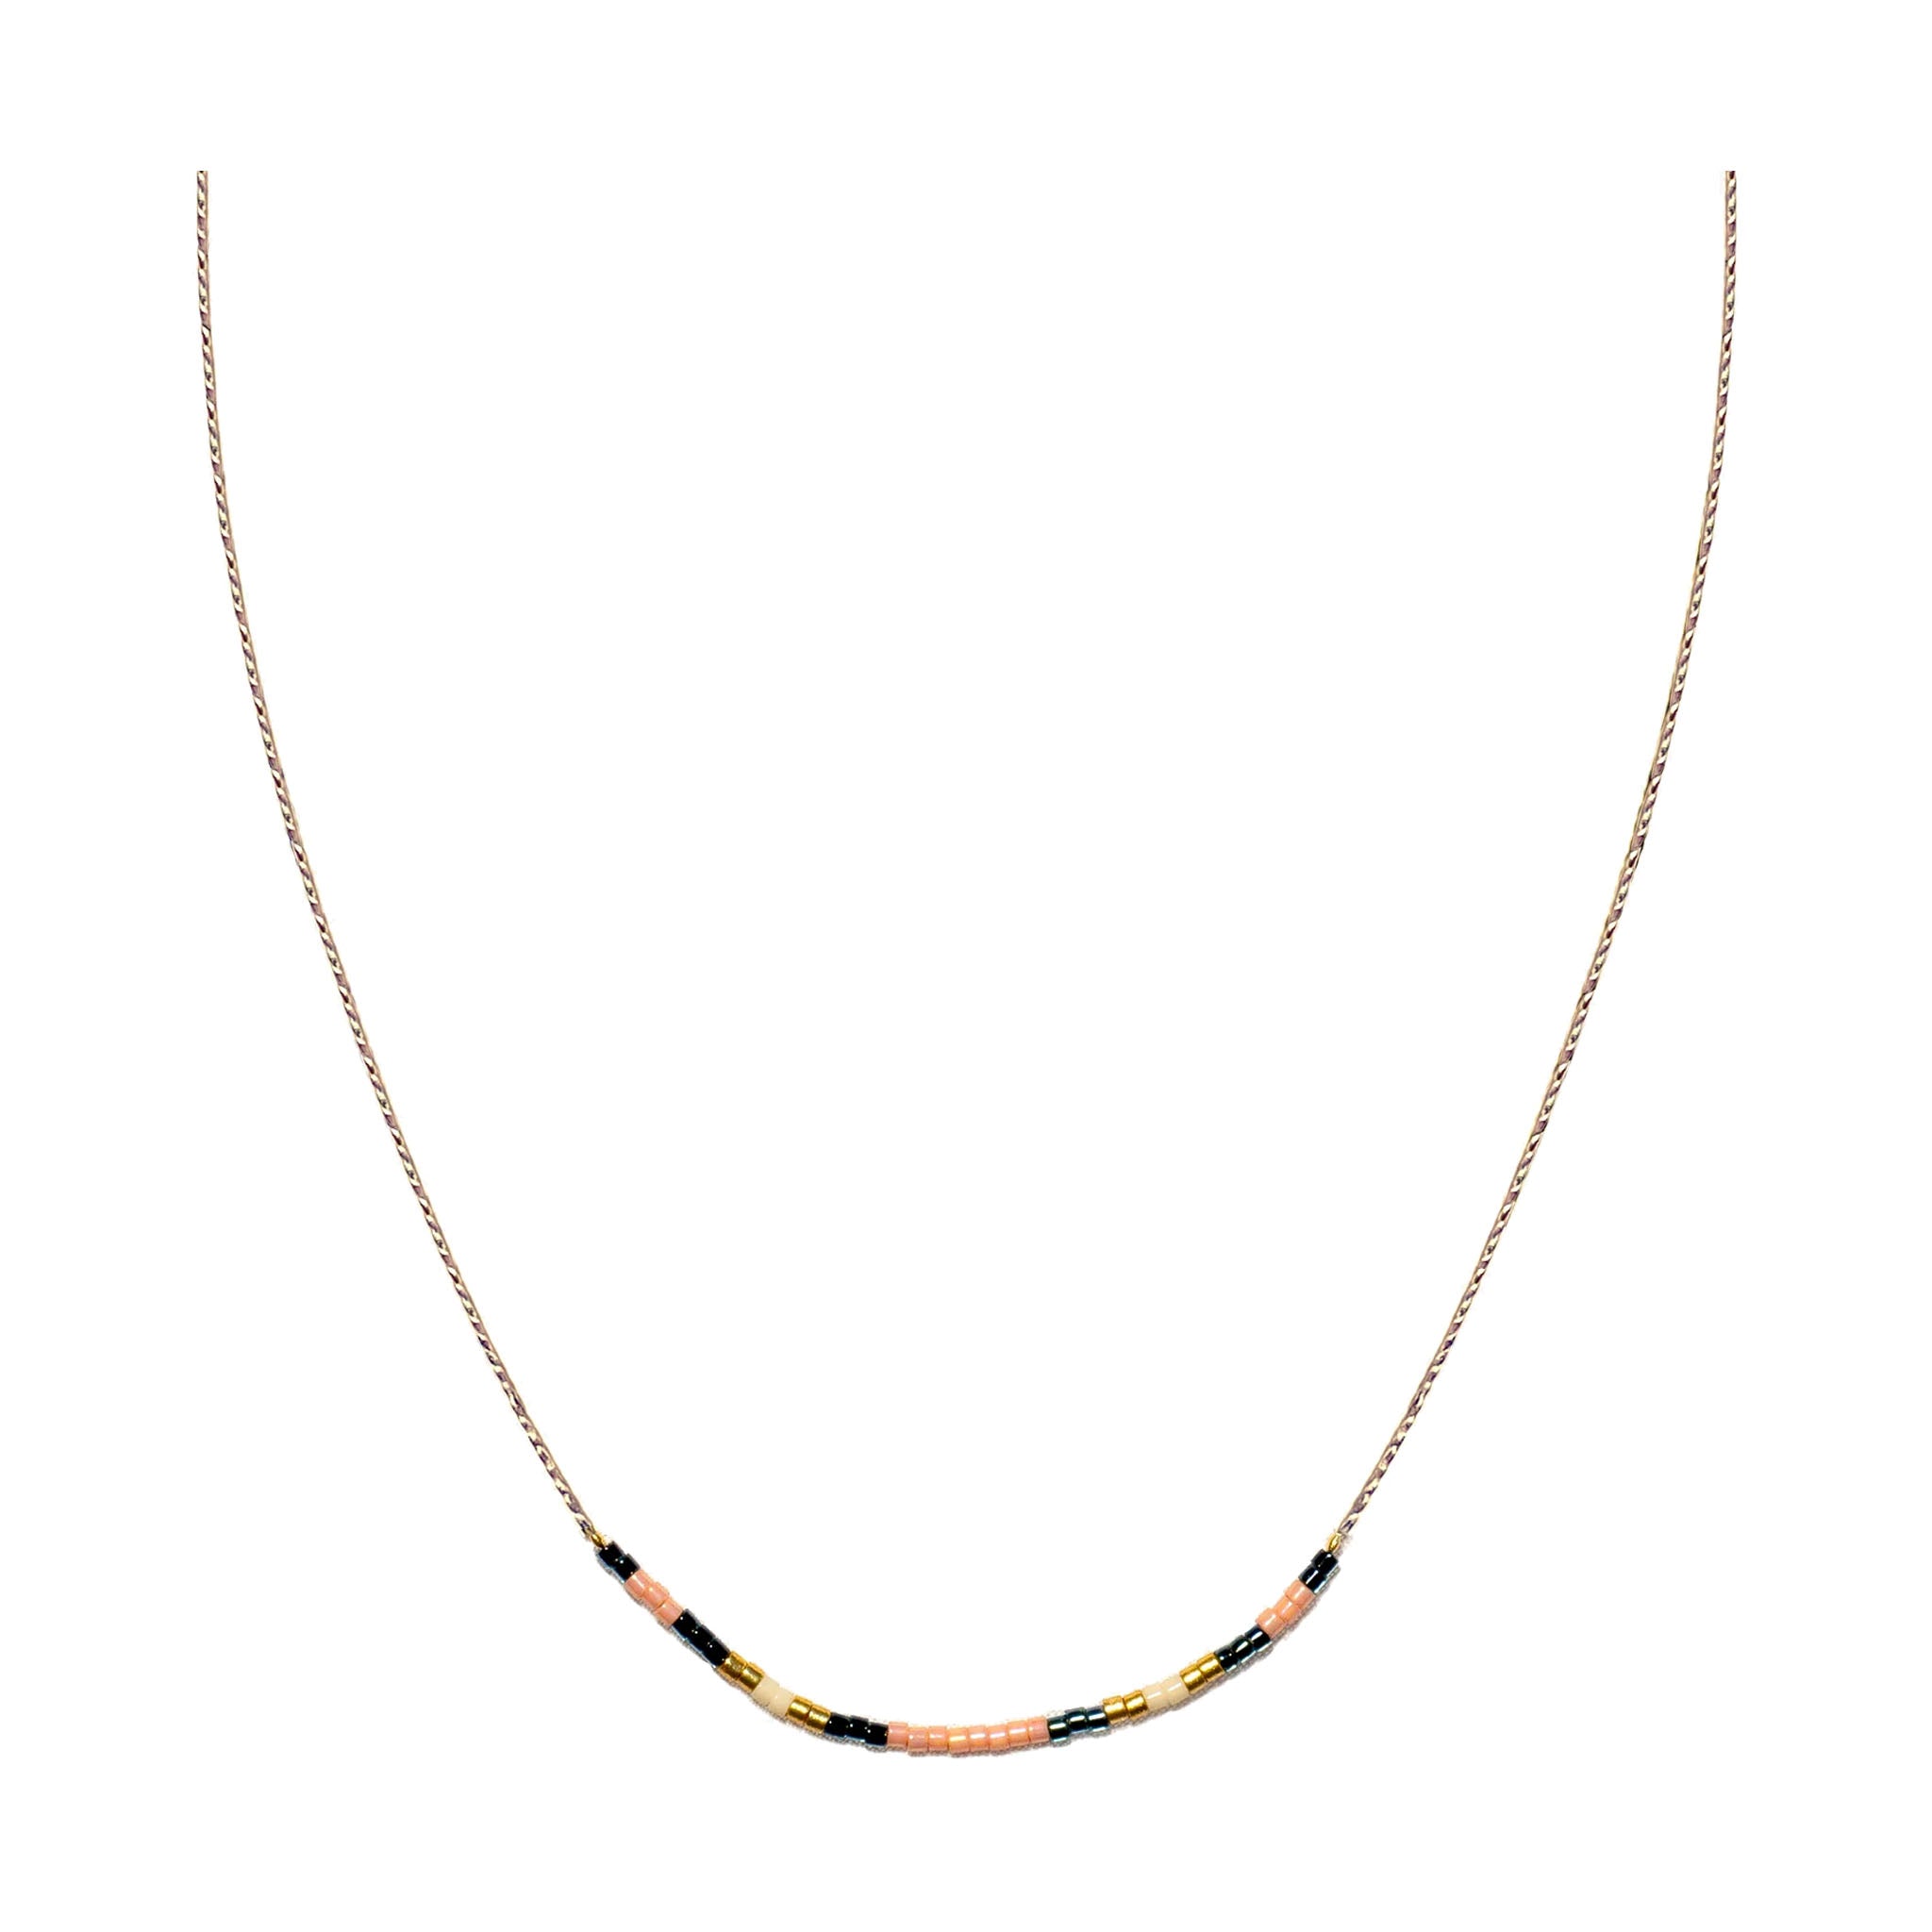 Intention Necklace - Sweet Peach